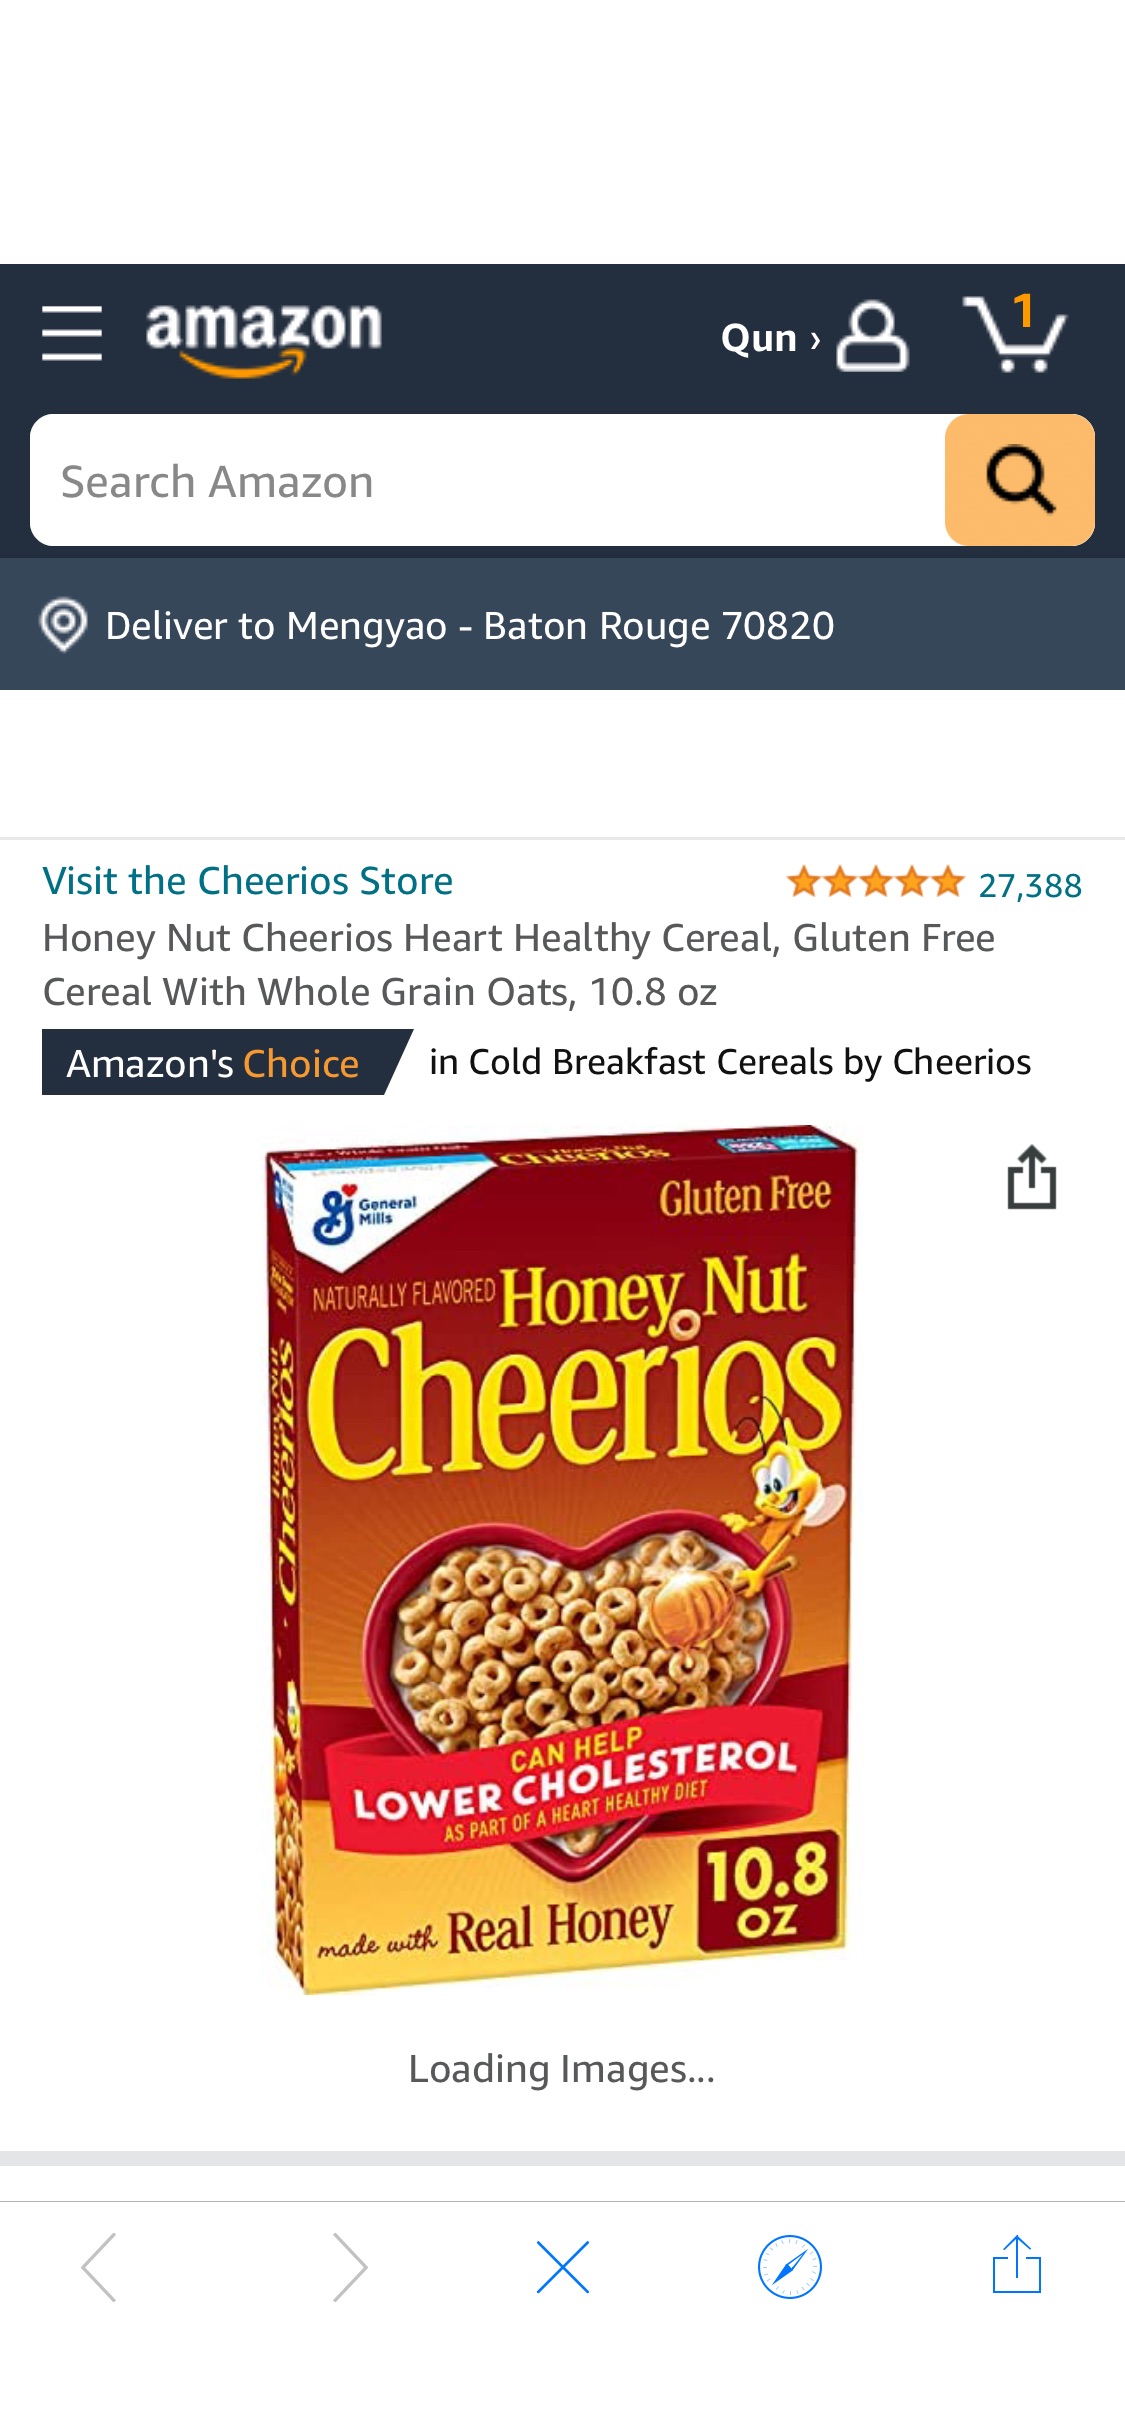 Amazon.com: Honey Nut Cheerios Heart Healthy Cereal, Gluten Free Cereal With Whole Grain Oats, 10.8 oz 零食